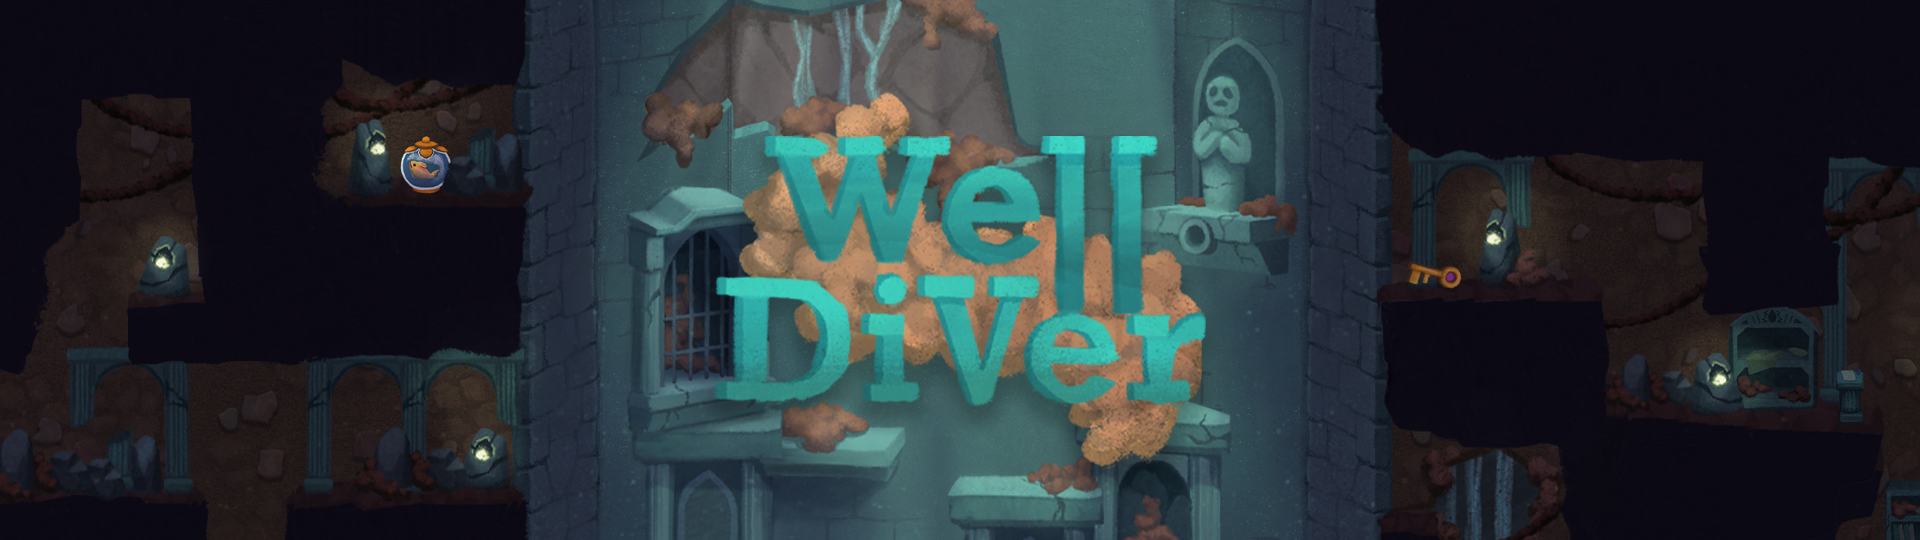 Well Diver